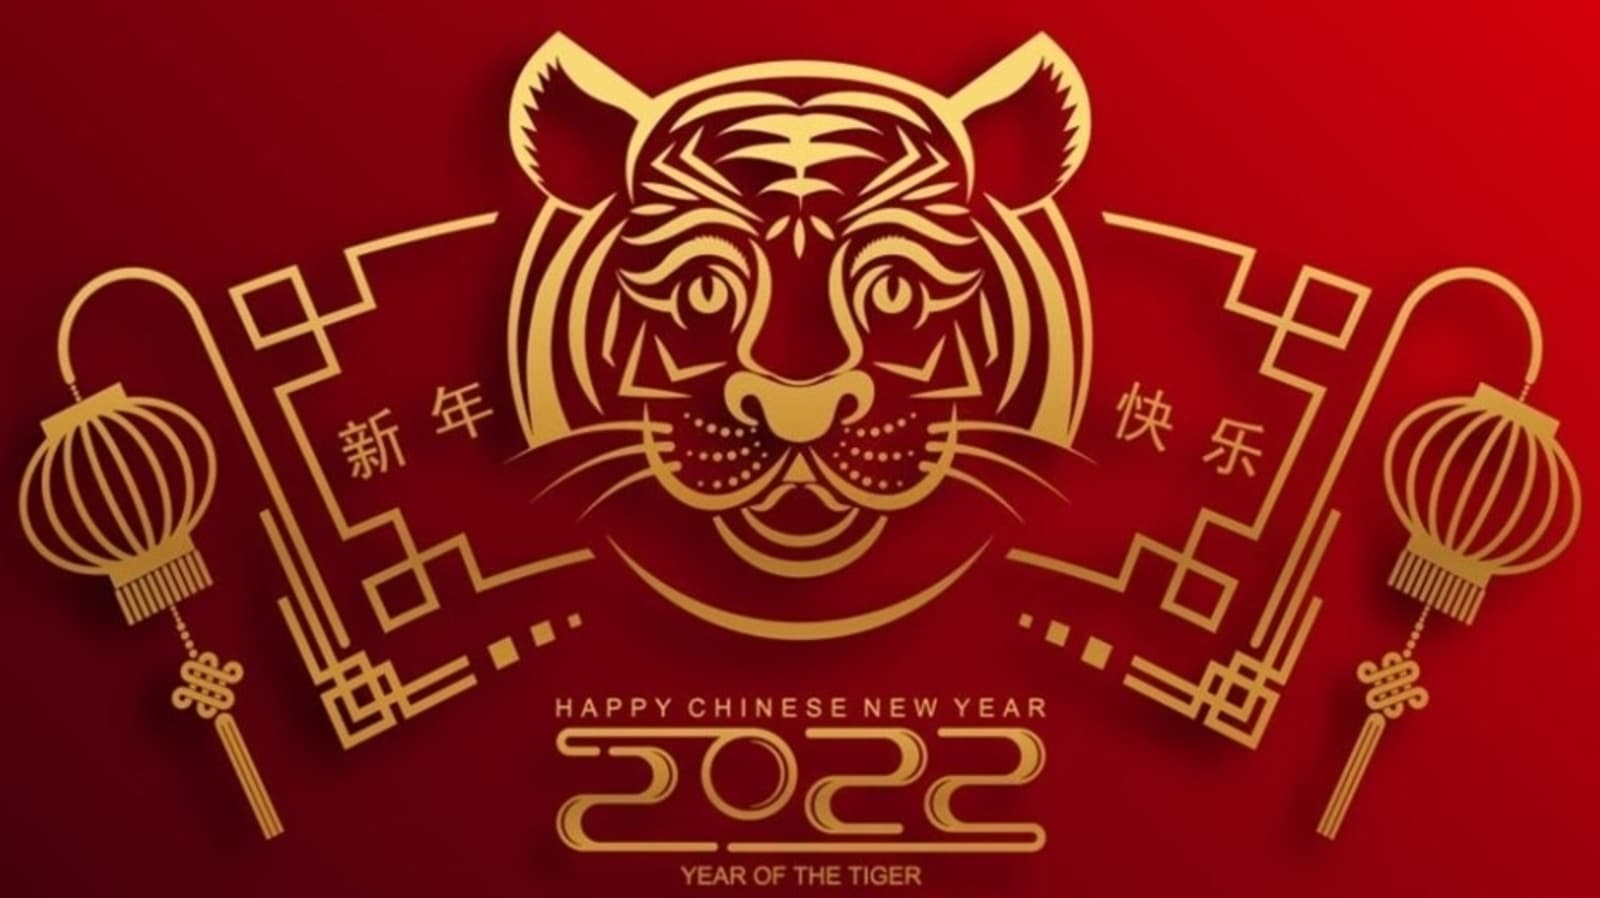 lunar new year: Lunar New Year: History, Significance and all you need to  know about the Year of the Rabbit - The Economic Times